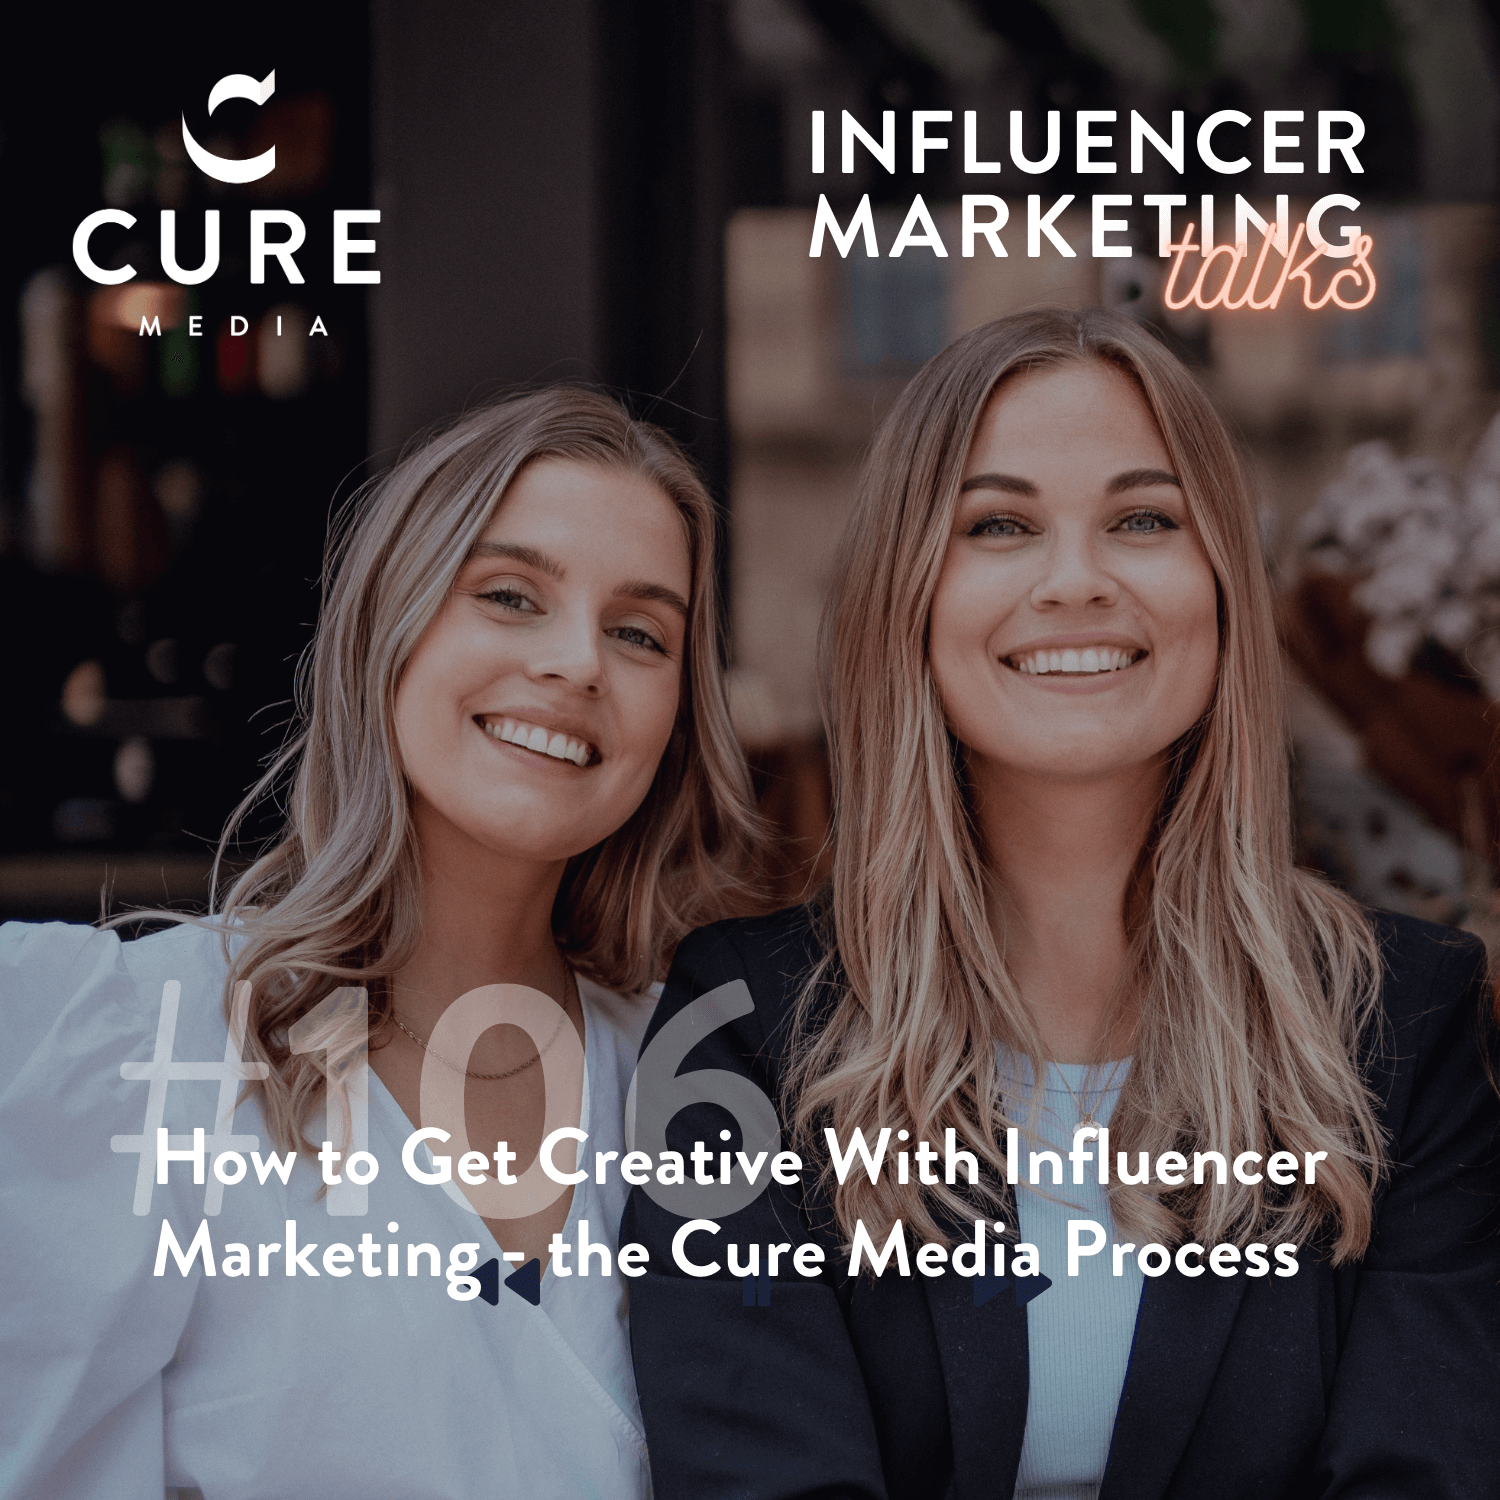 E106 - How to Get Creative With Influencer Marketing - the Cure Media Process